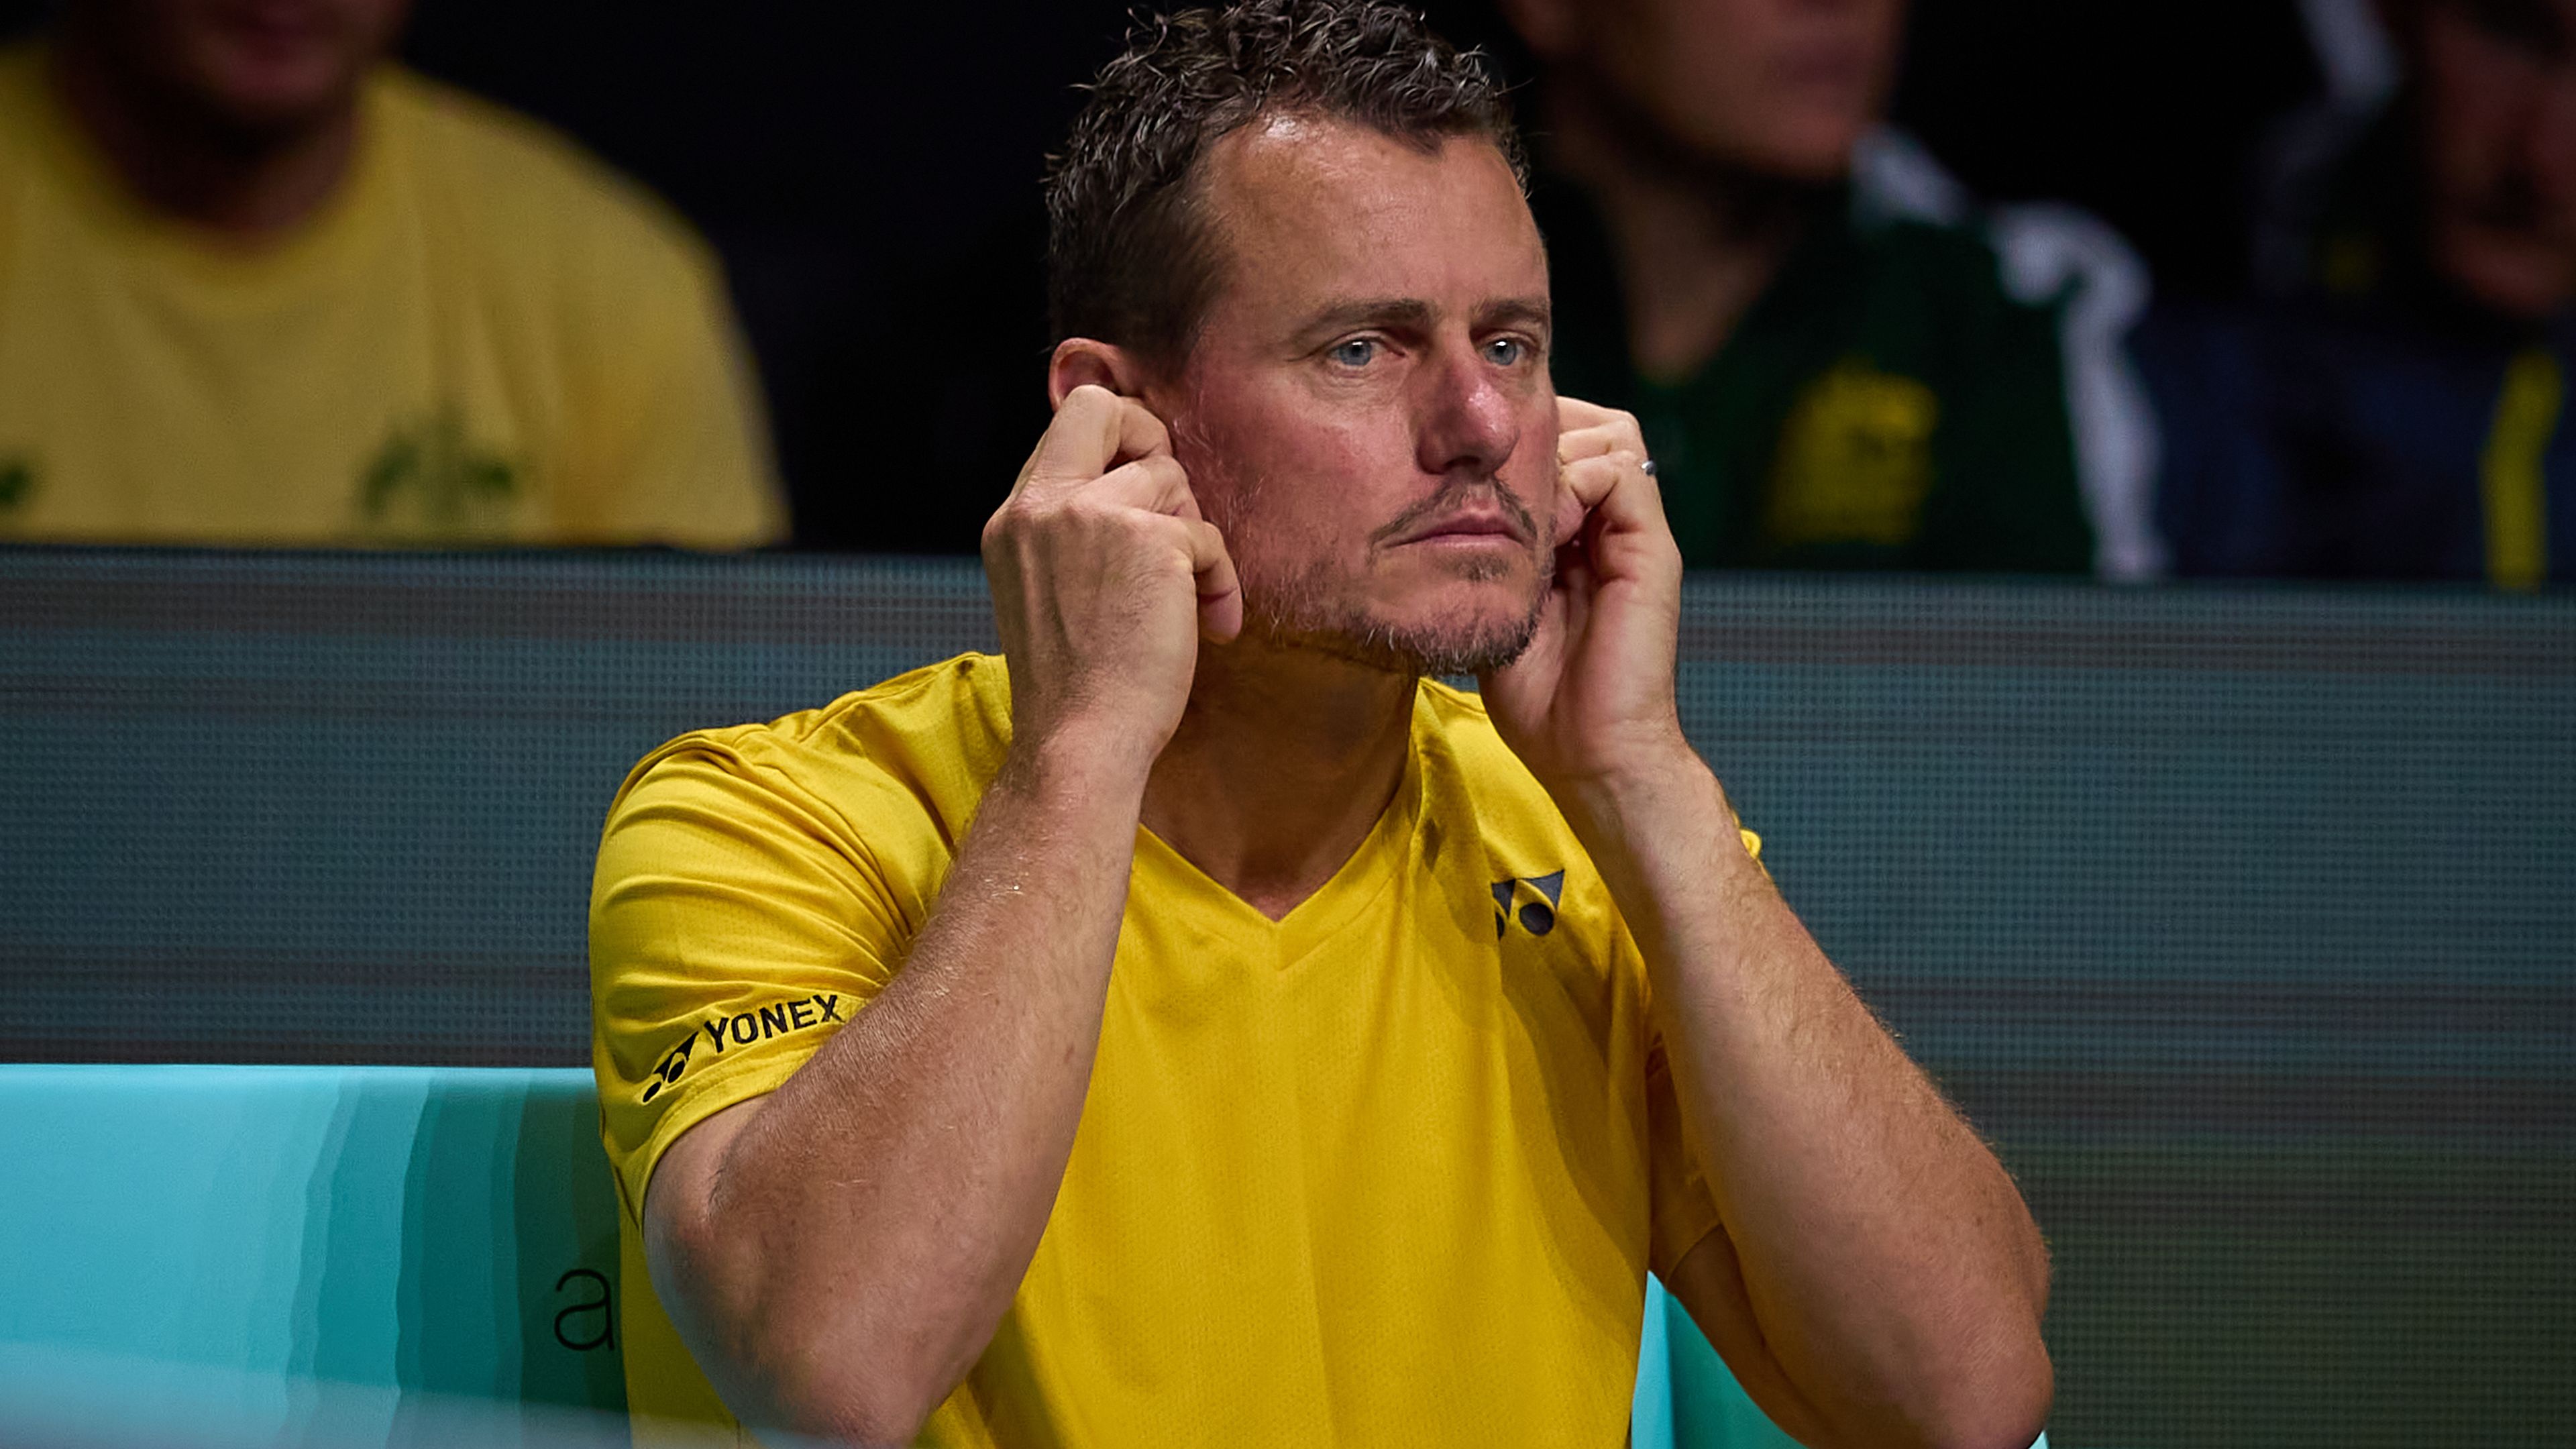 Australia 'gutted' as Canada claims first ever Davis Cup title with 2-0 win in final